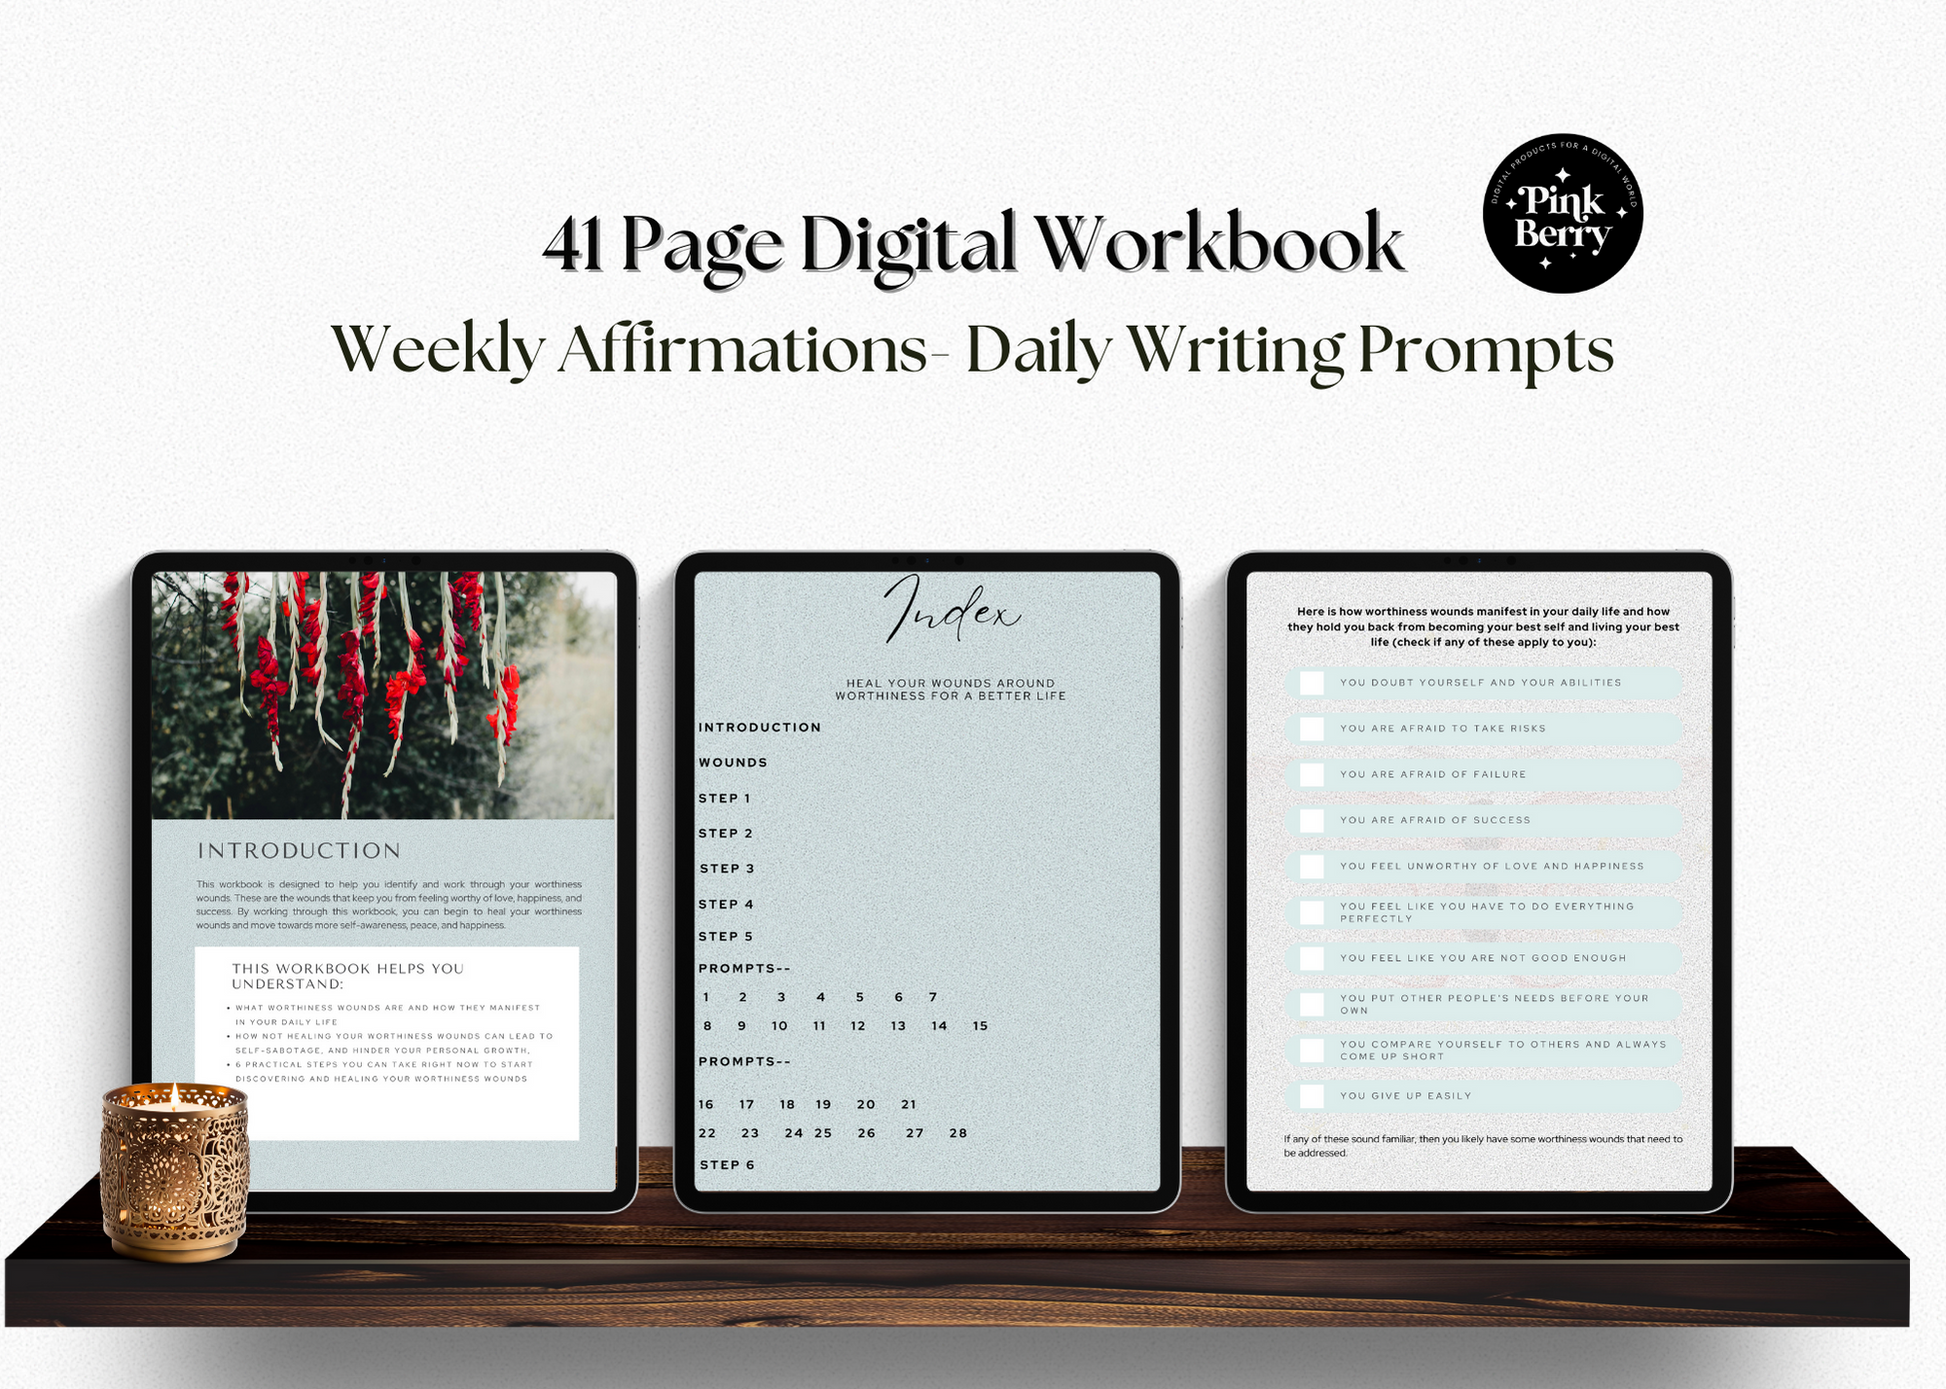 PLR Inner Core Wounds Digital Workbook-41 Page Goodnotes Digital Workbook- Completely White Labeled For Coaches/ Course Creators and Publishers Media 1 of 8